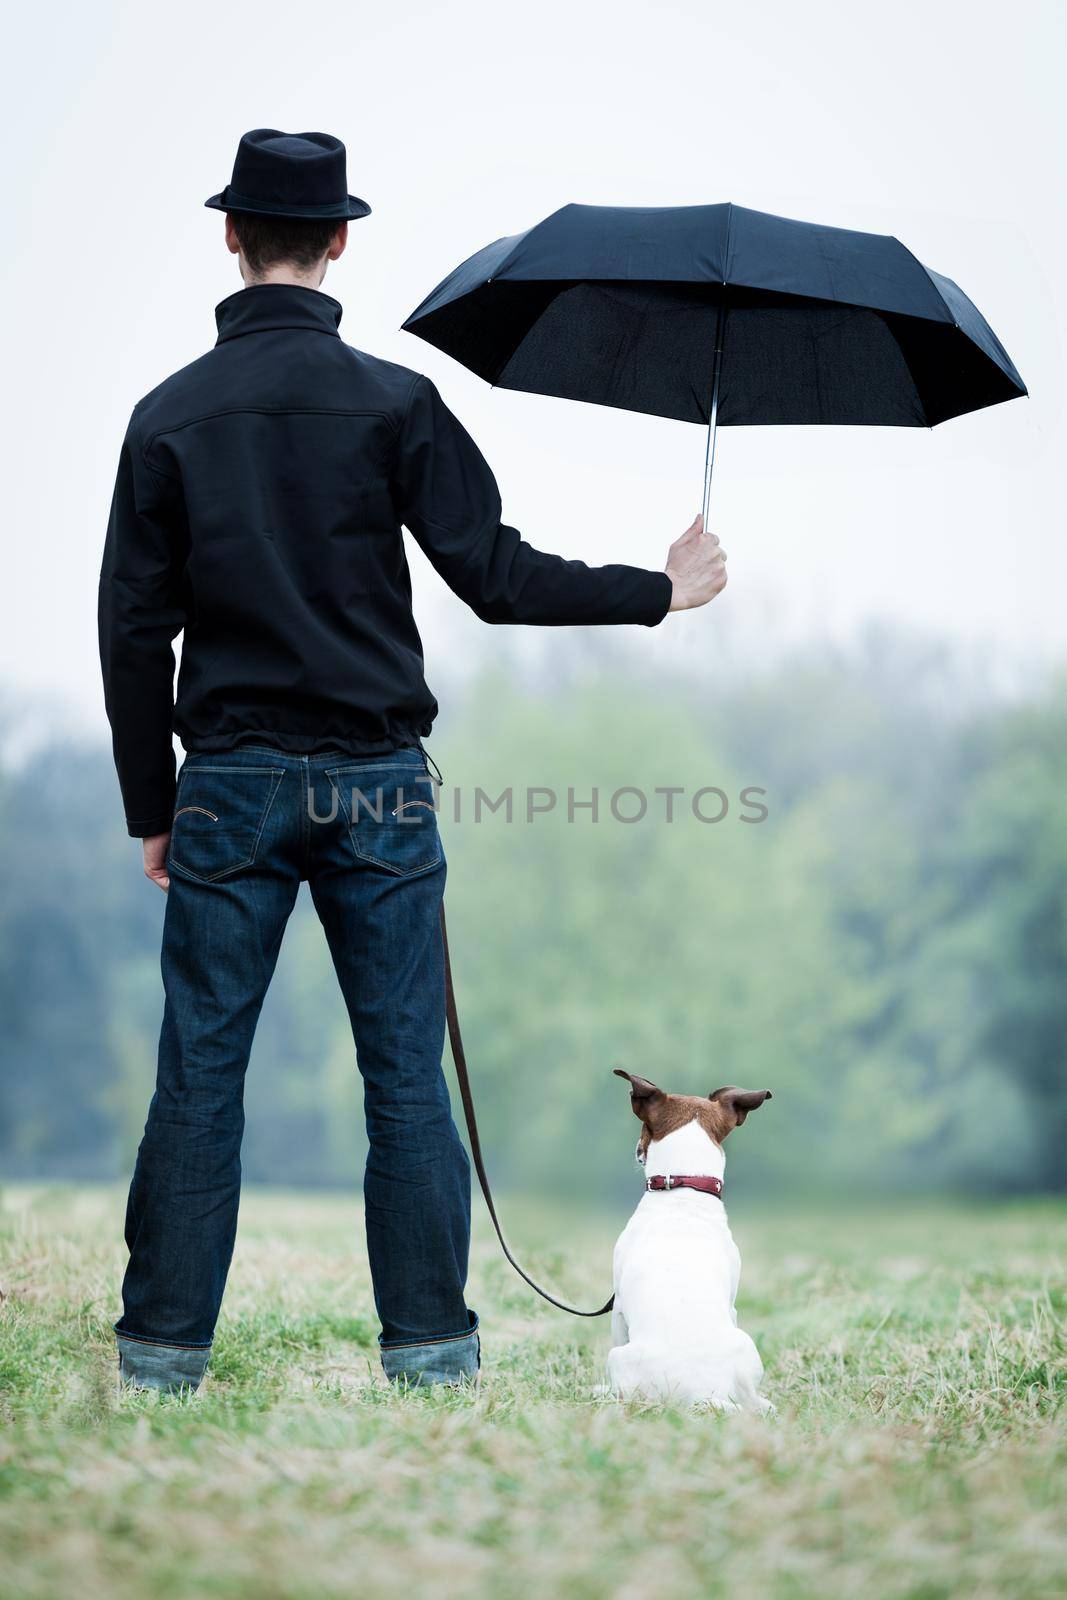 friendship between dog and owner standing in the rain with umbrella